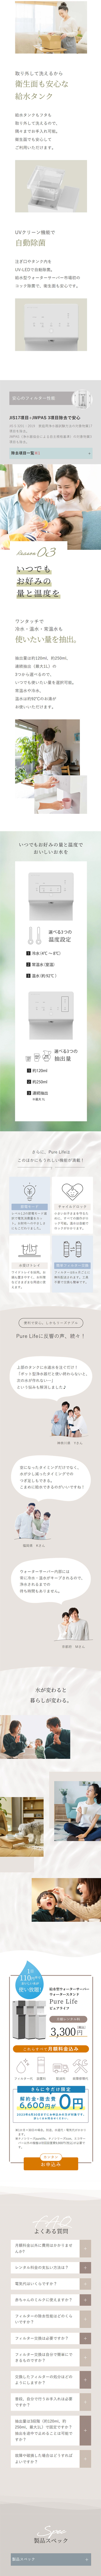 WATER STAND Pure Life_sp_2